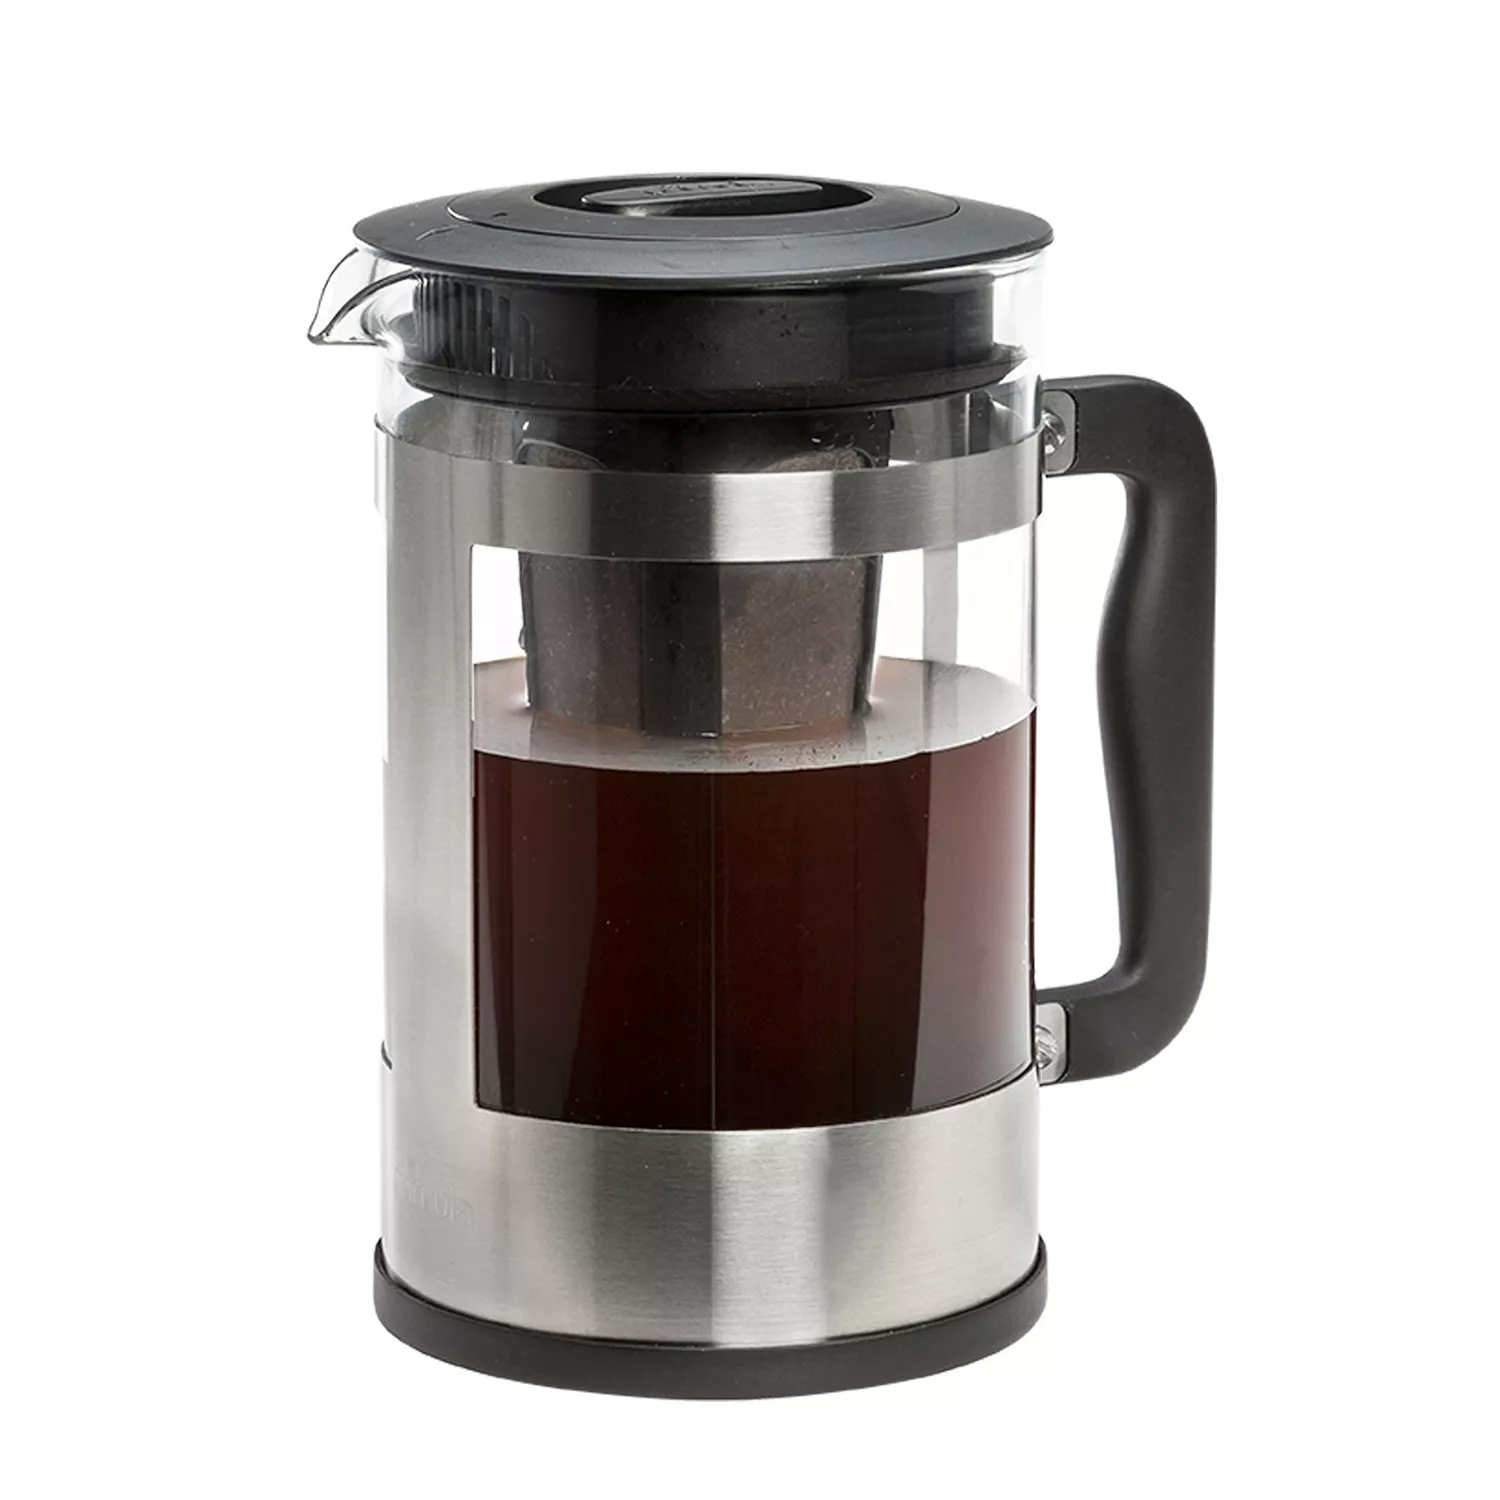 Check out these new at cold brew makers : r/starbucks